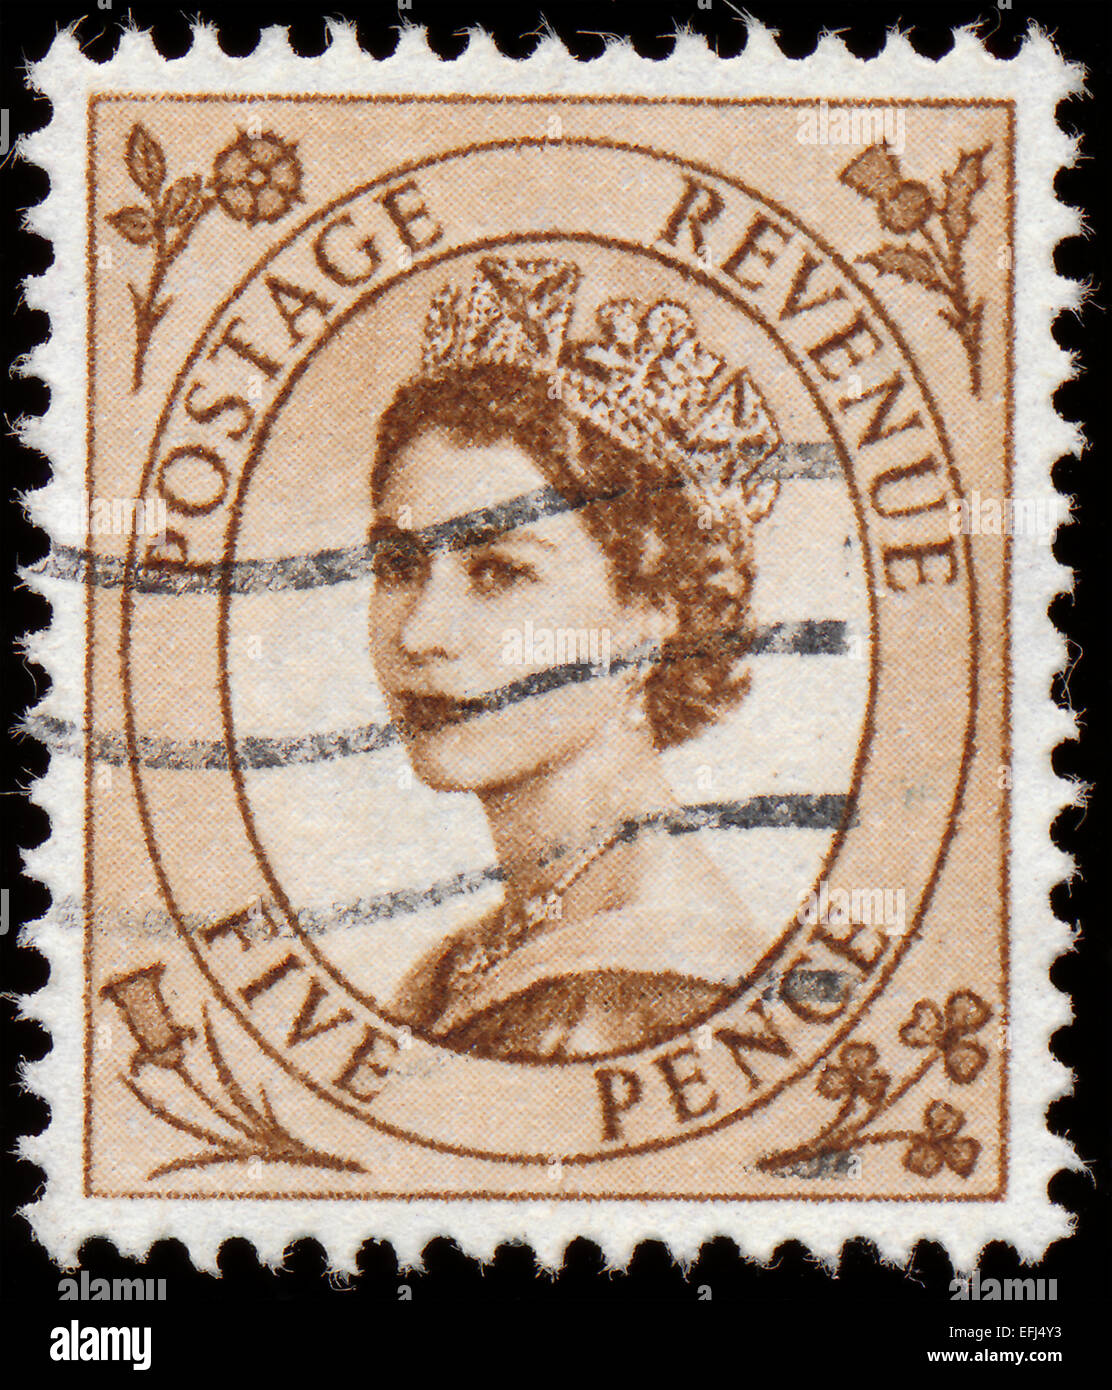 UNITED KINGDOM - CIRCA 1952 to 1965: An English Five Pence Brown Used Postage Stamp showing Portrait of Queen Elizabeth 2nd, cir Stock Photo